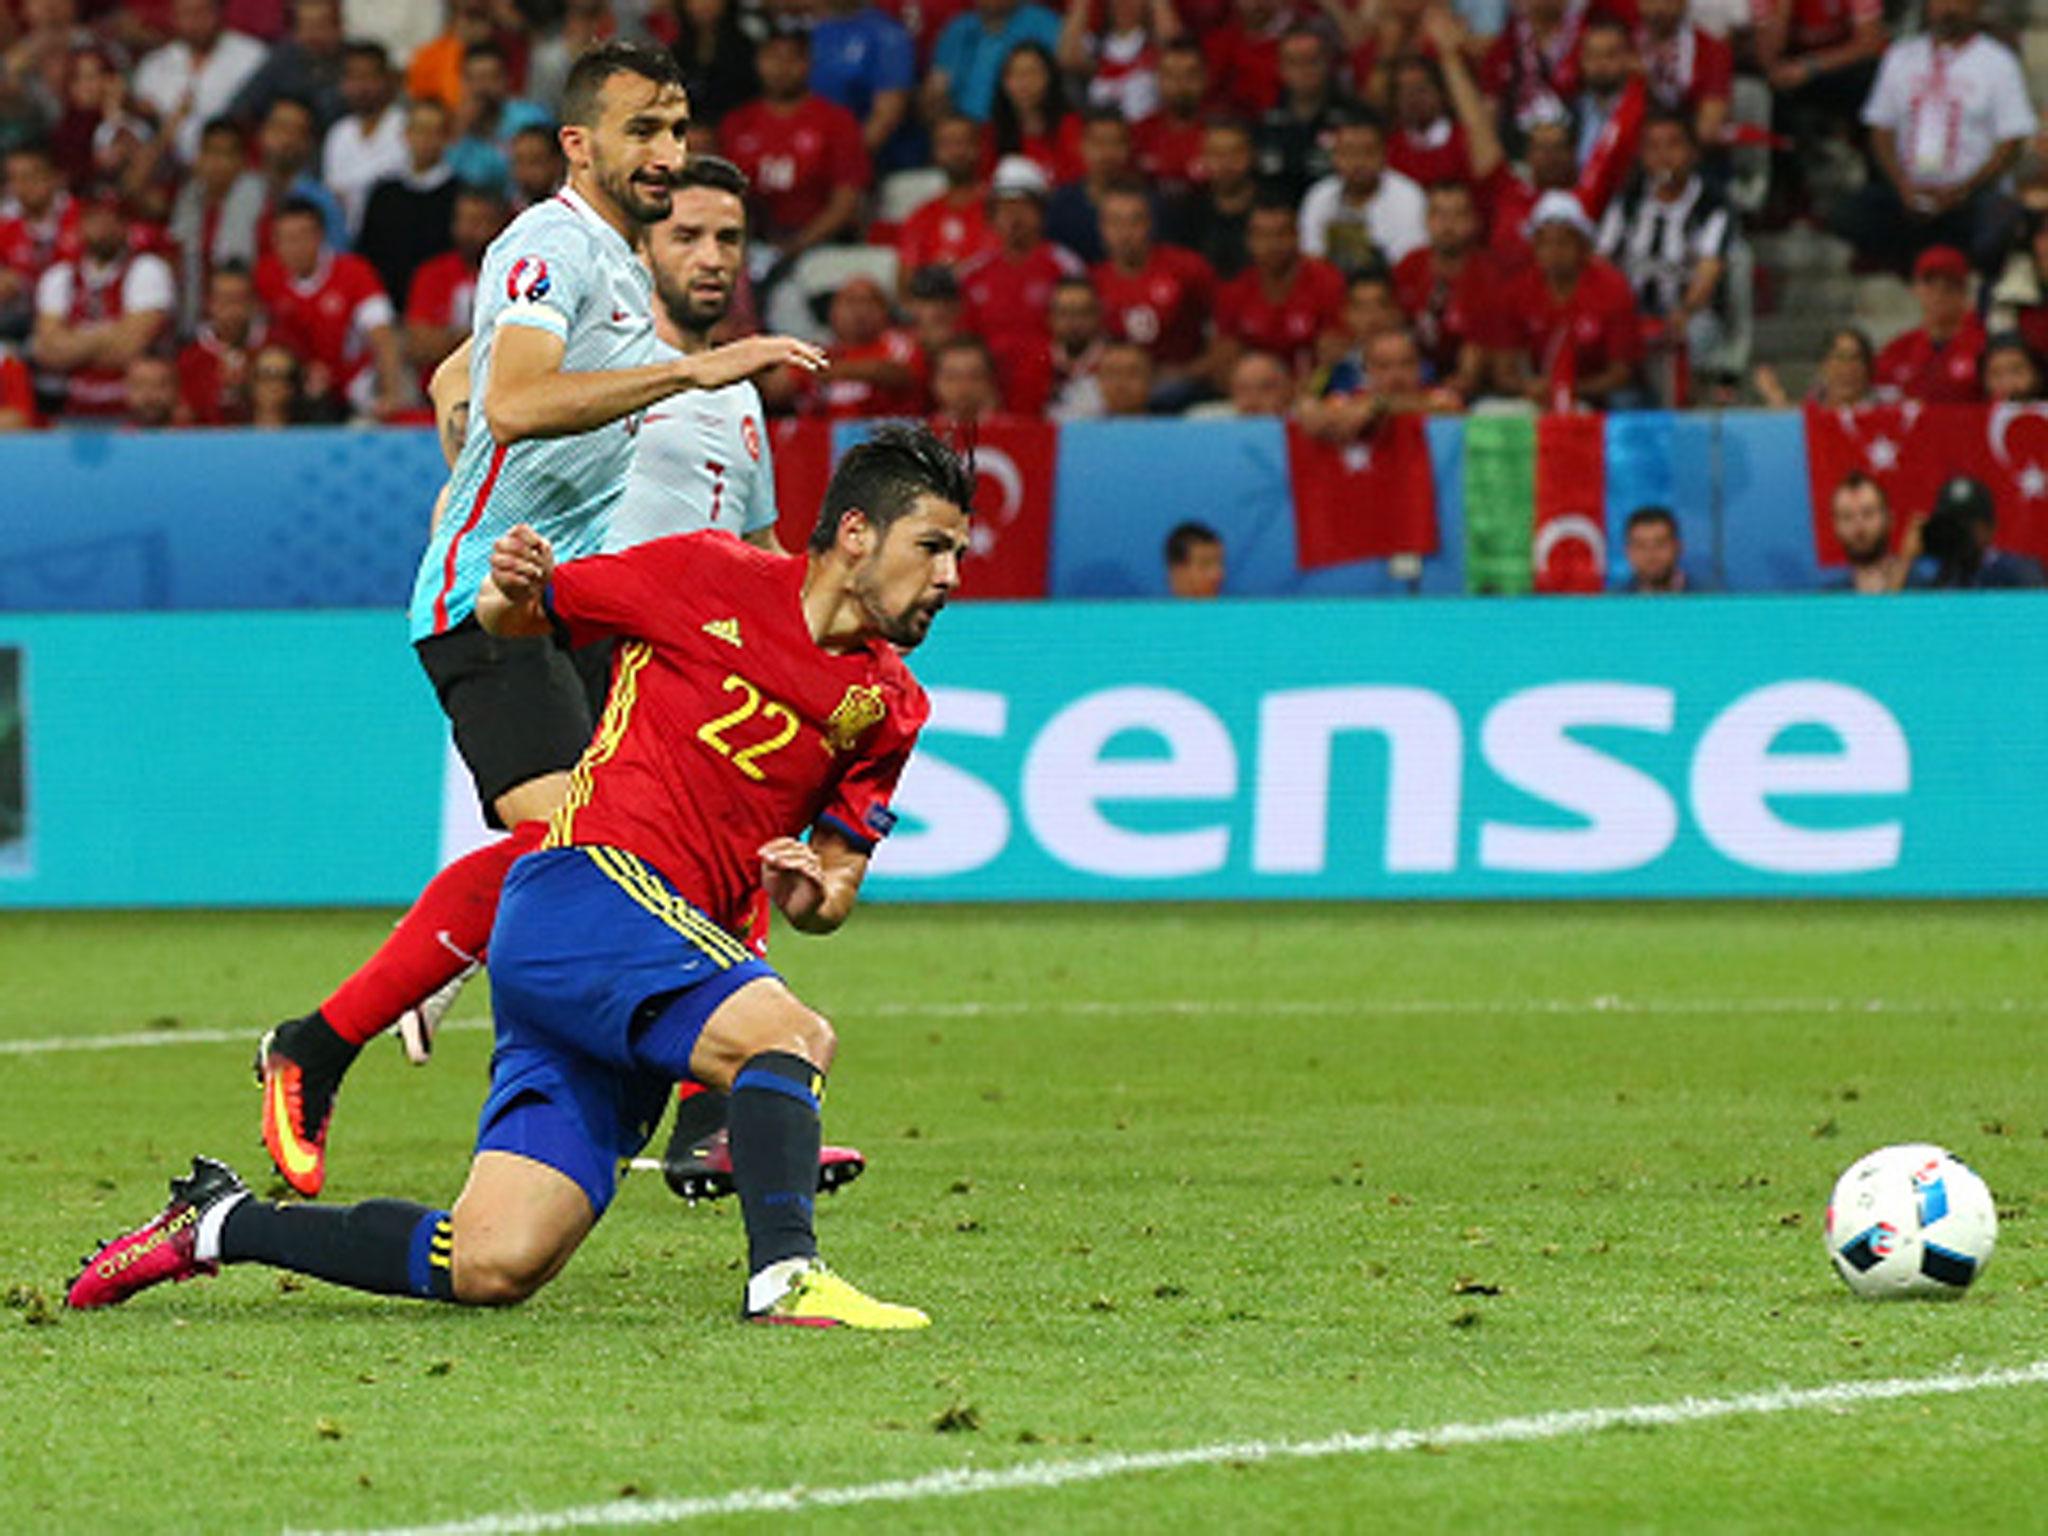 Nolito has offered Spain new attacking threat